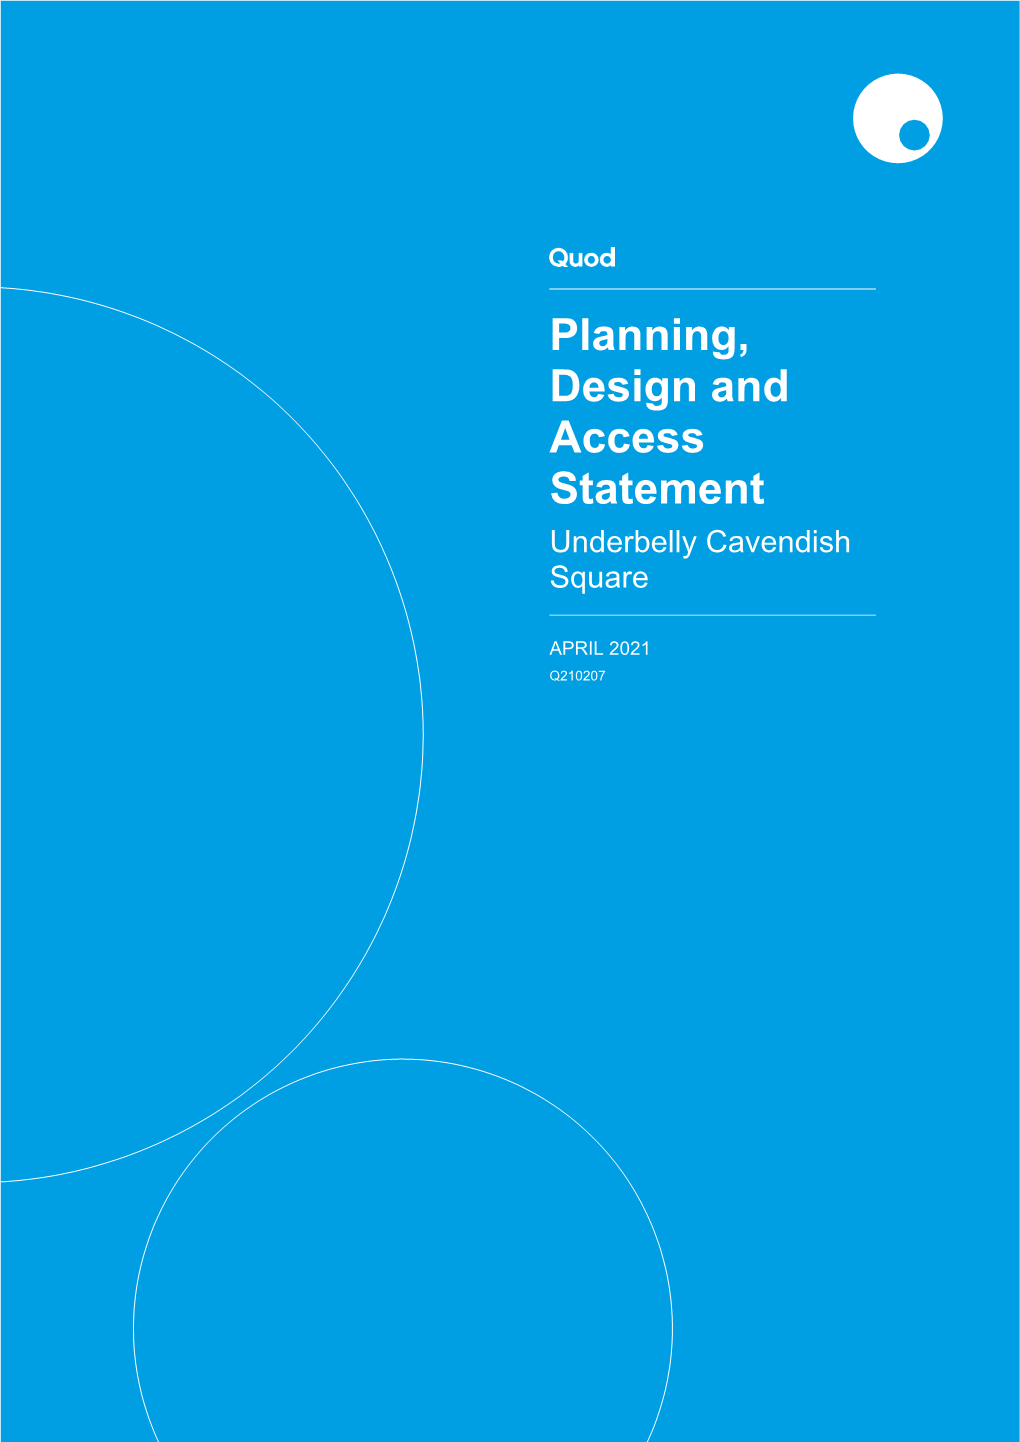 Planning, Design and Access Statement Underbelly Cavendish Square